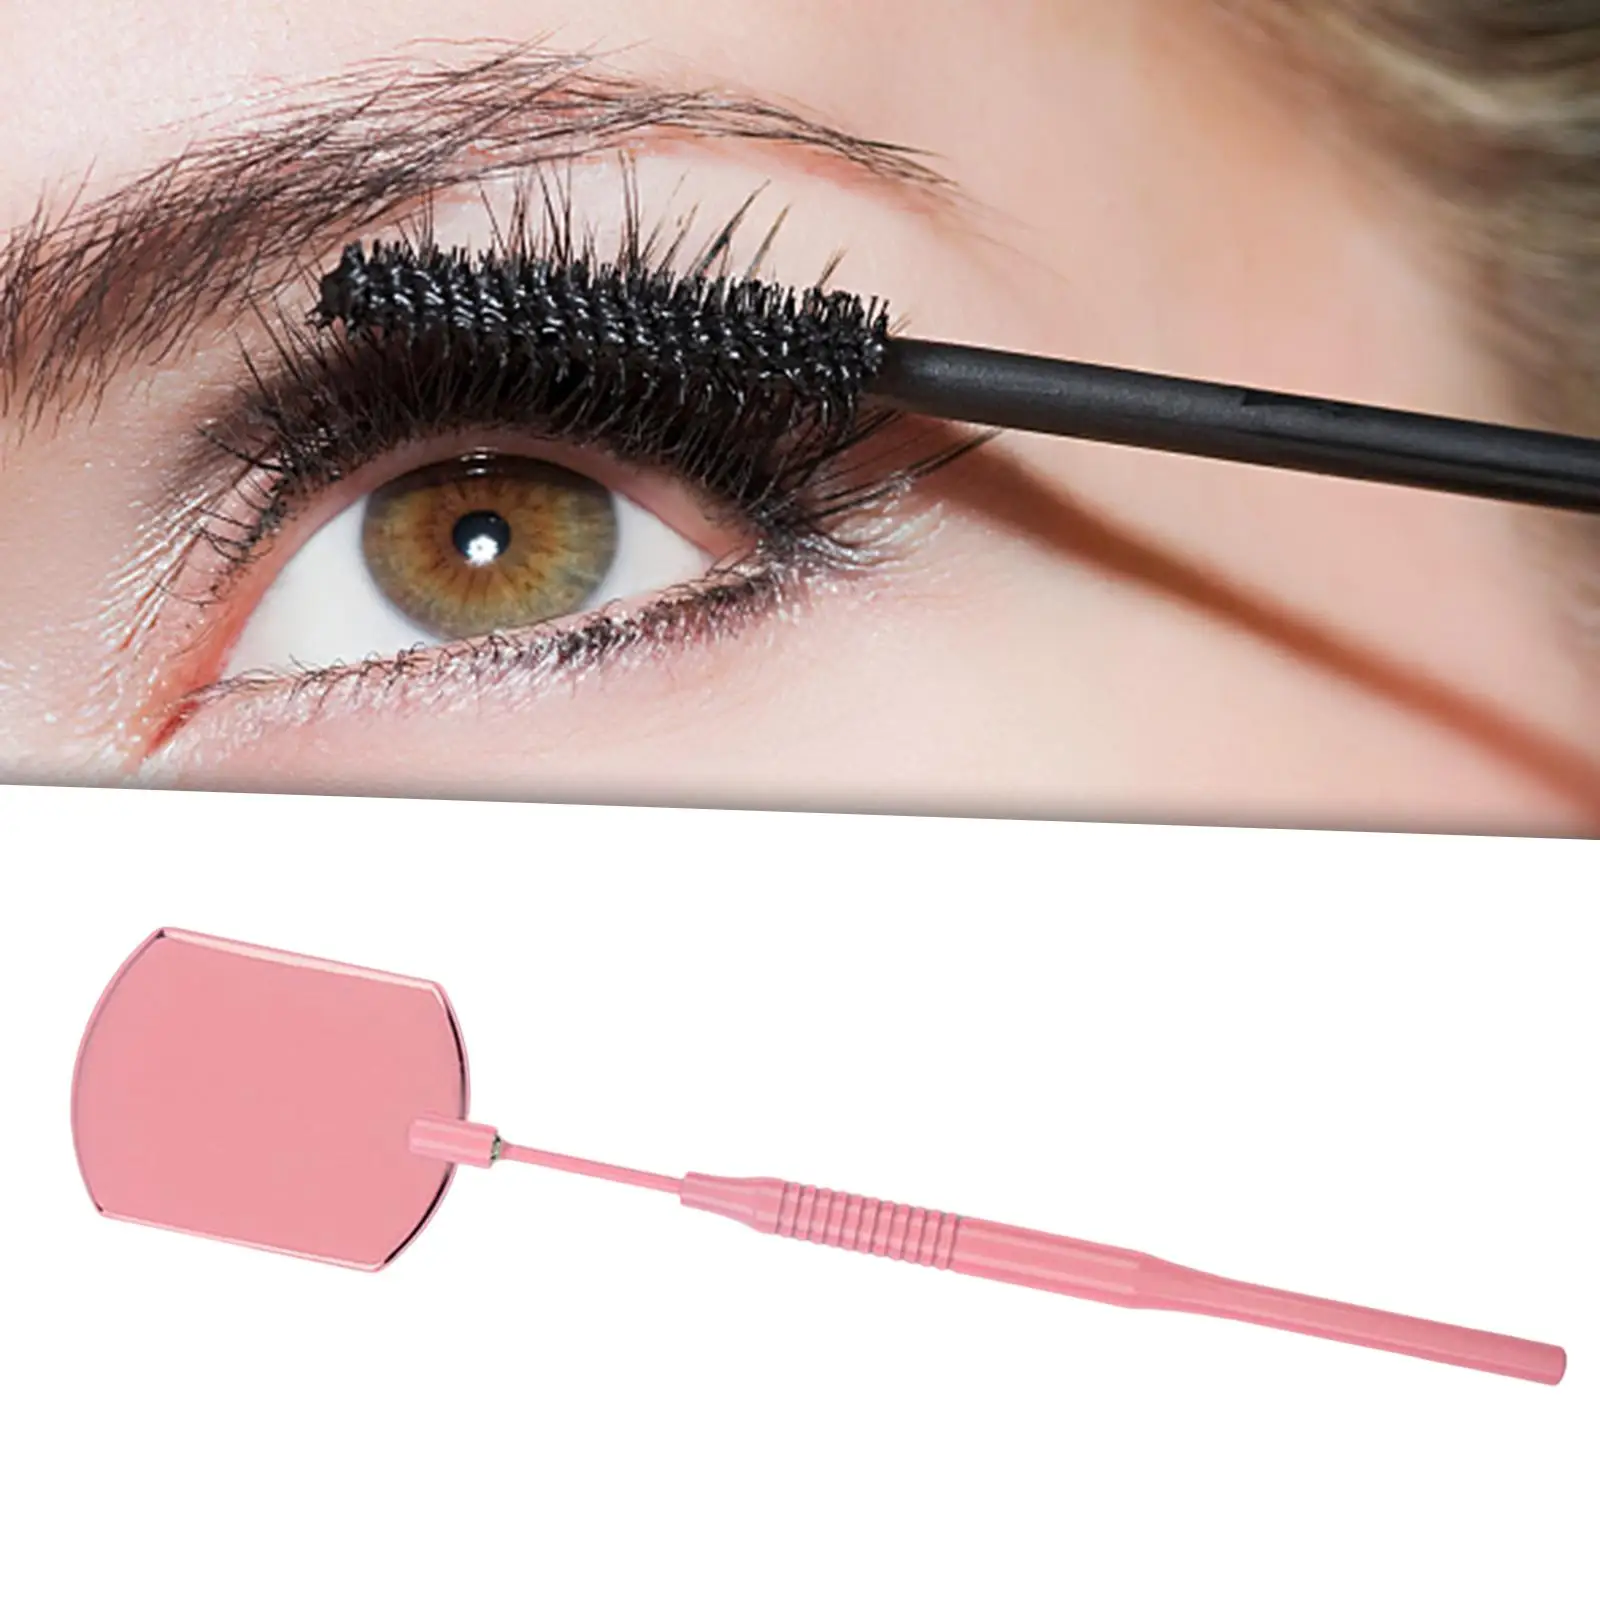 Eyelash Mirror Lash Tool Square Mirror Professional for Women Girls Detachable Easily Adjust to Any Angles Eyes Makeup Supplies